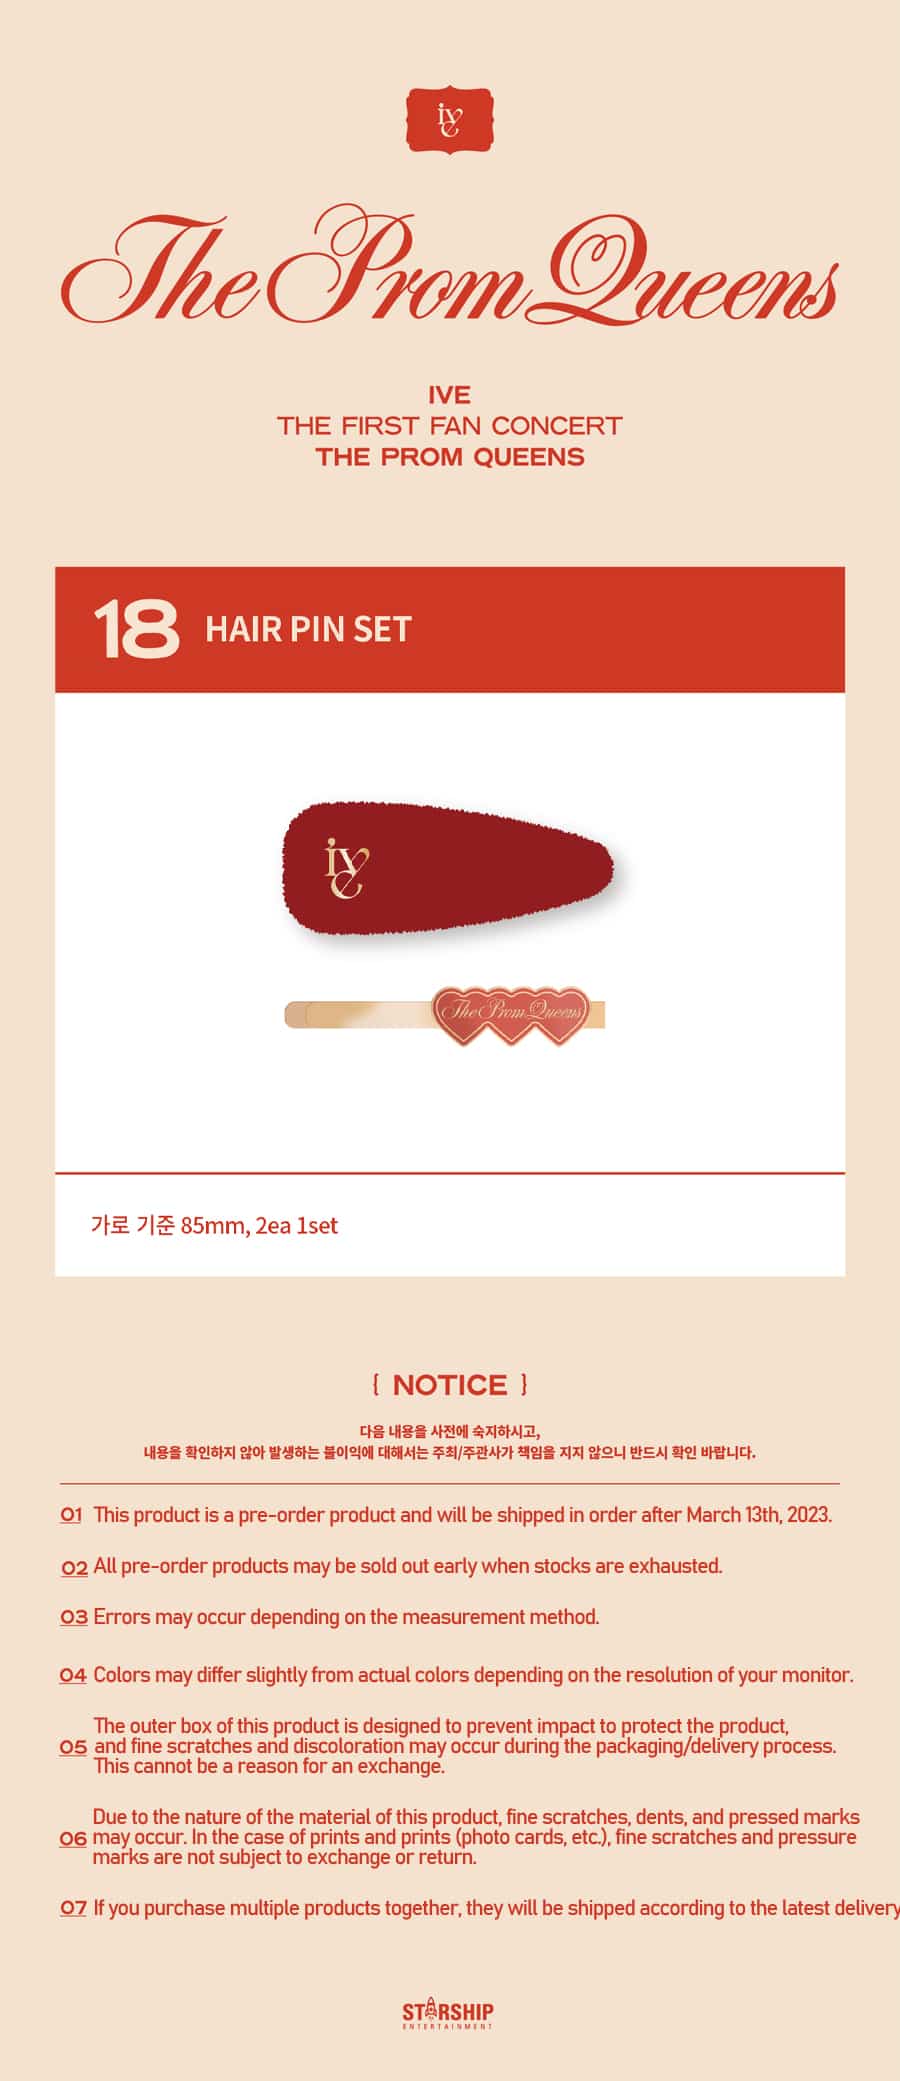 ive-the-prom-queens-hair-pin-set-wholesale